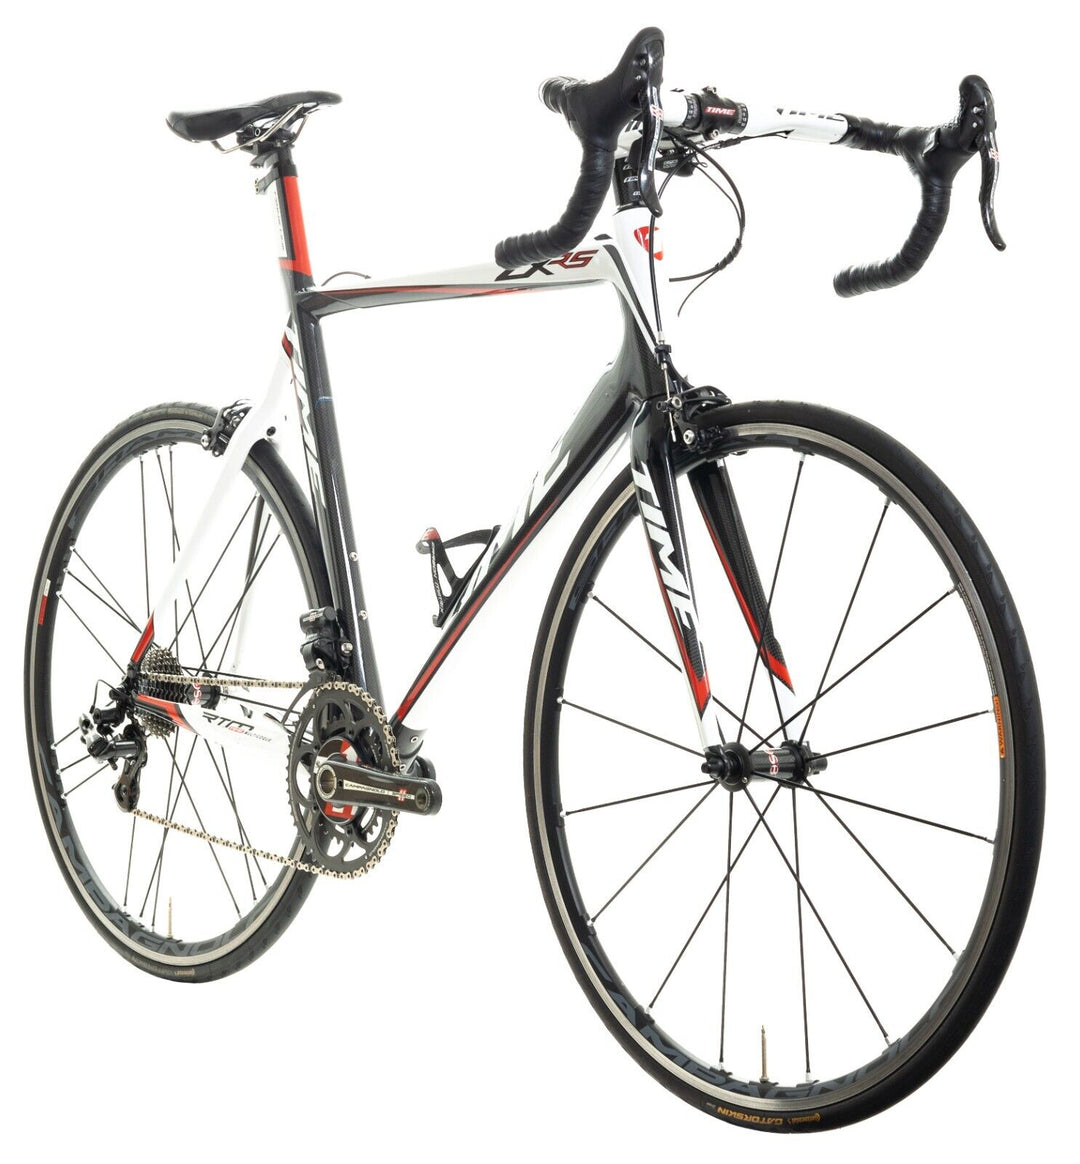 TIME ZXRS 2x 11 Spd Carbon Road Bike LARGE Campagnolo Super Record EPS SRM 2013